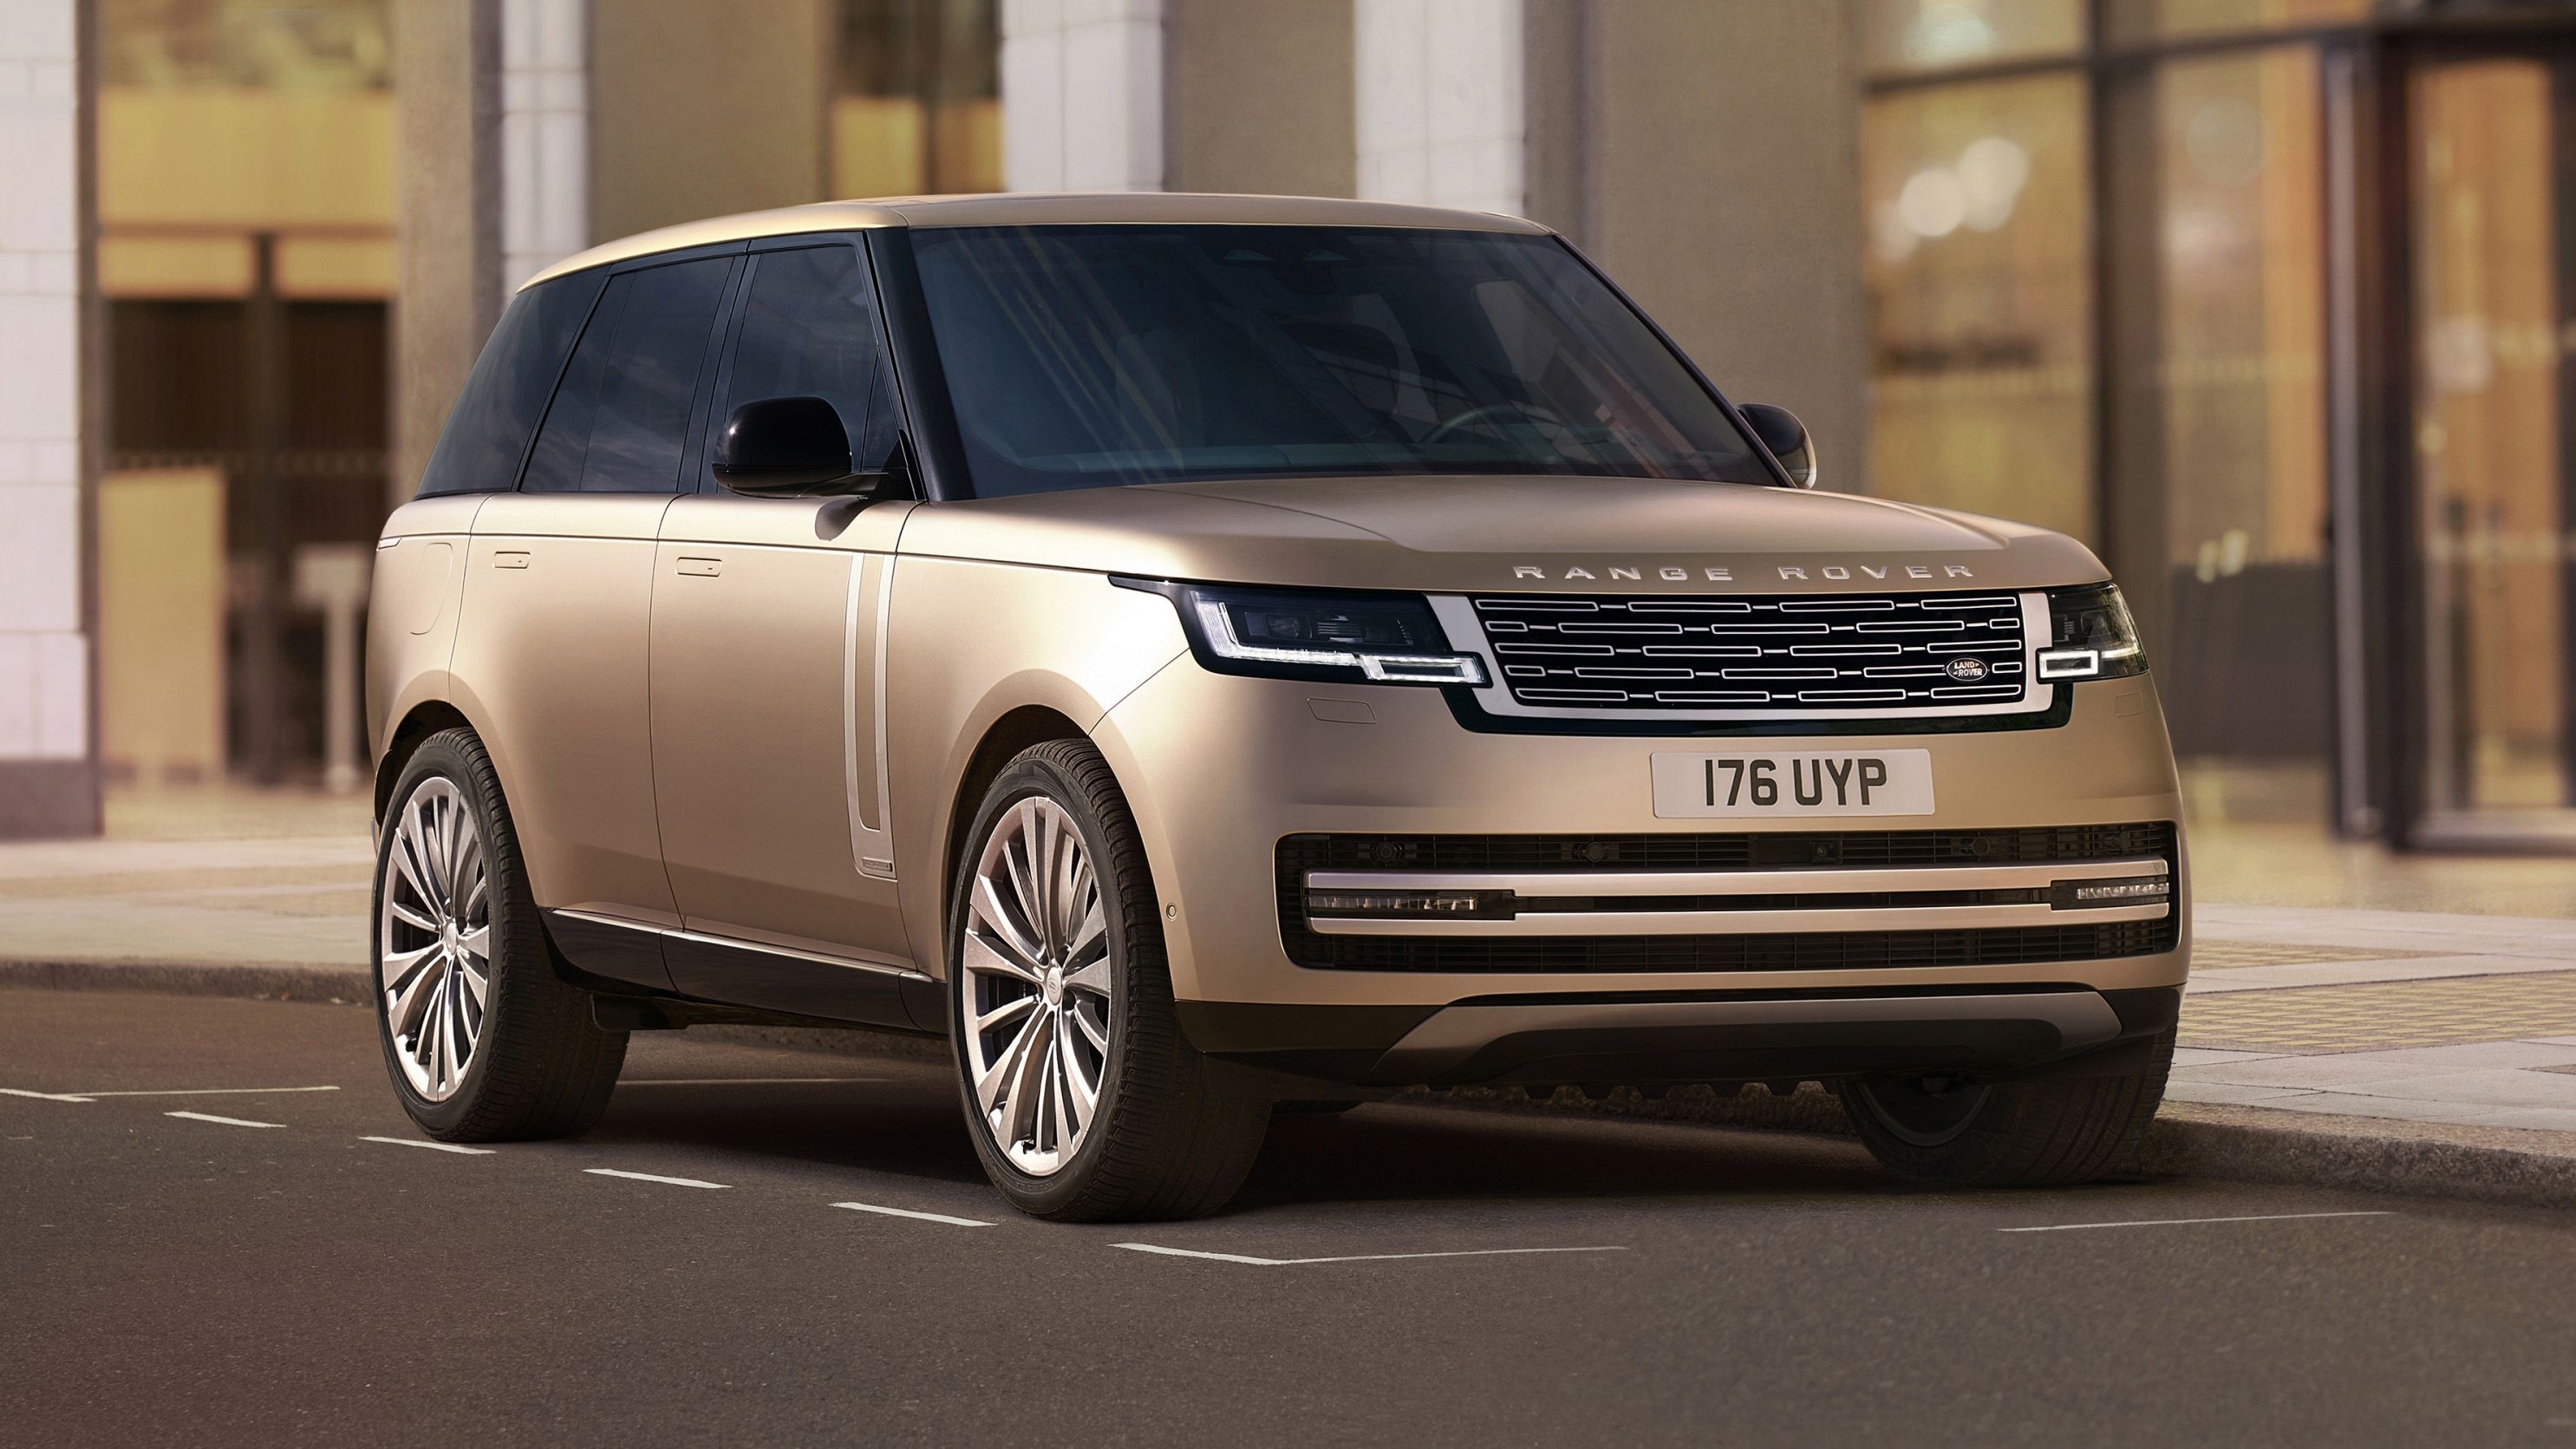 5th Generation Range Rover: Detailed Analysis and Review news